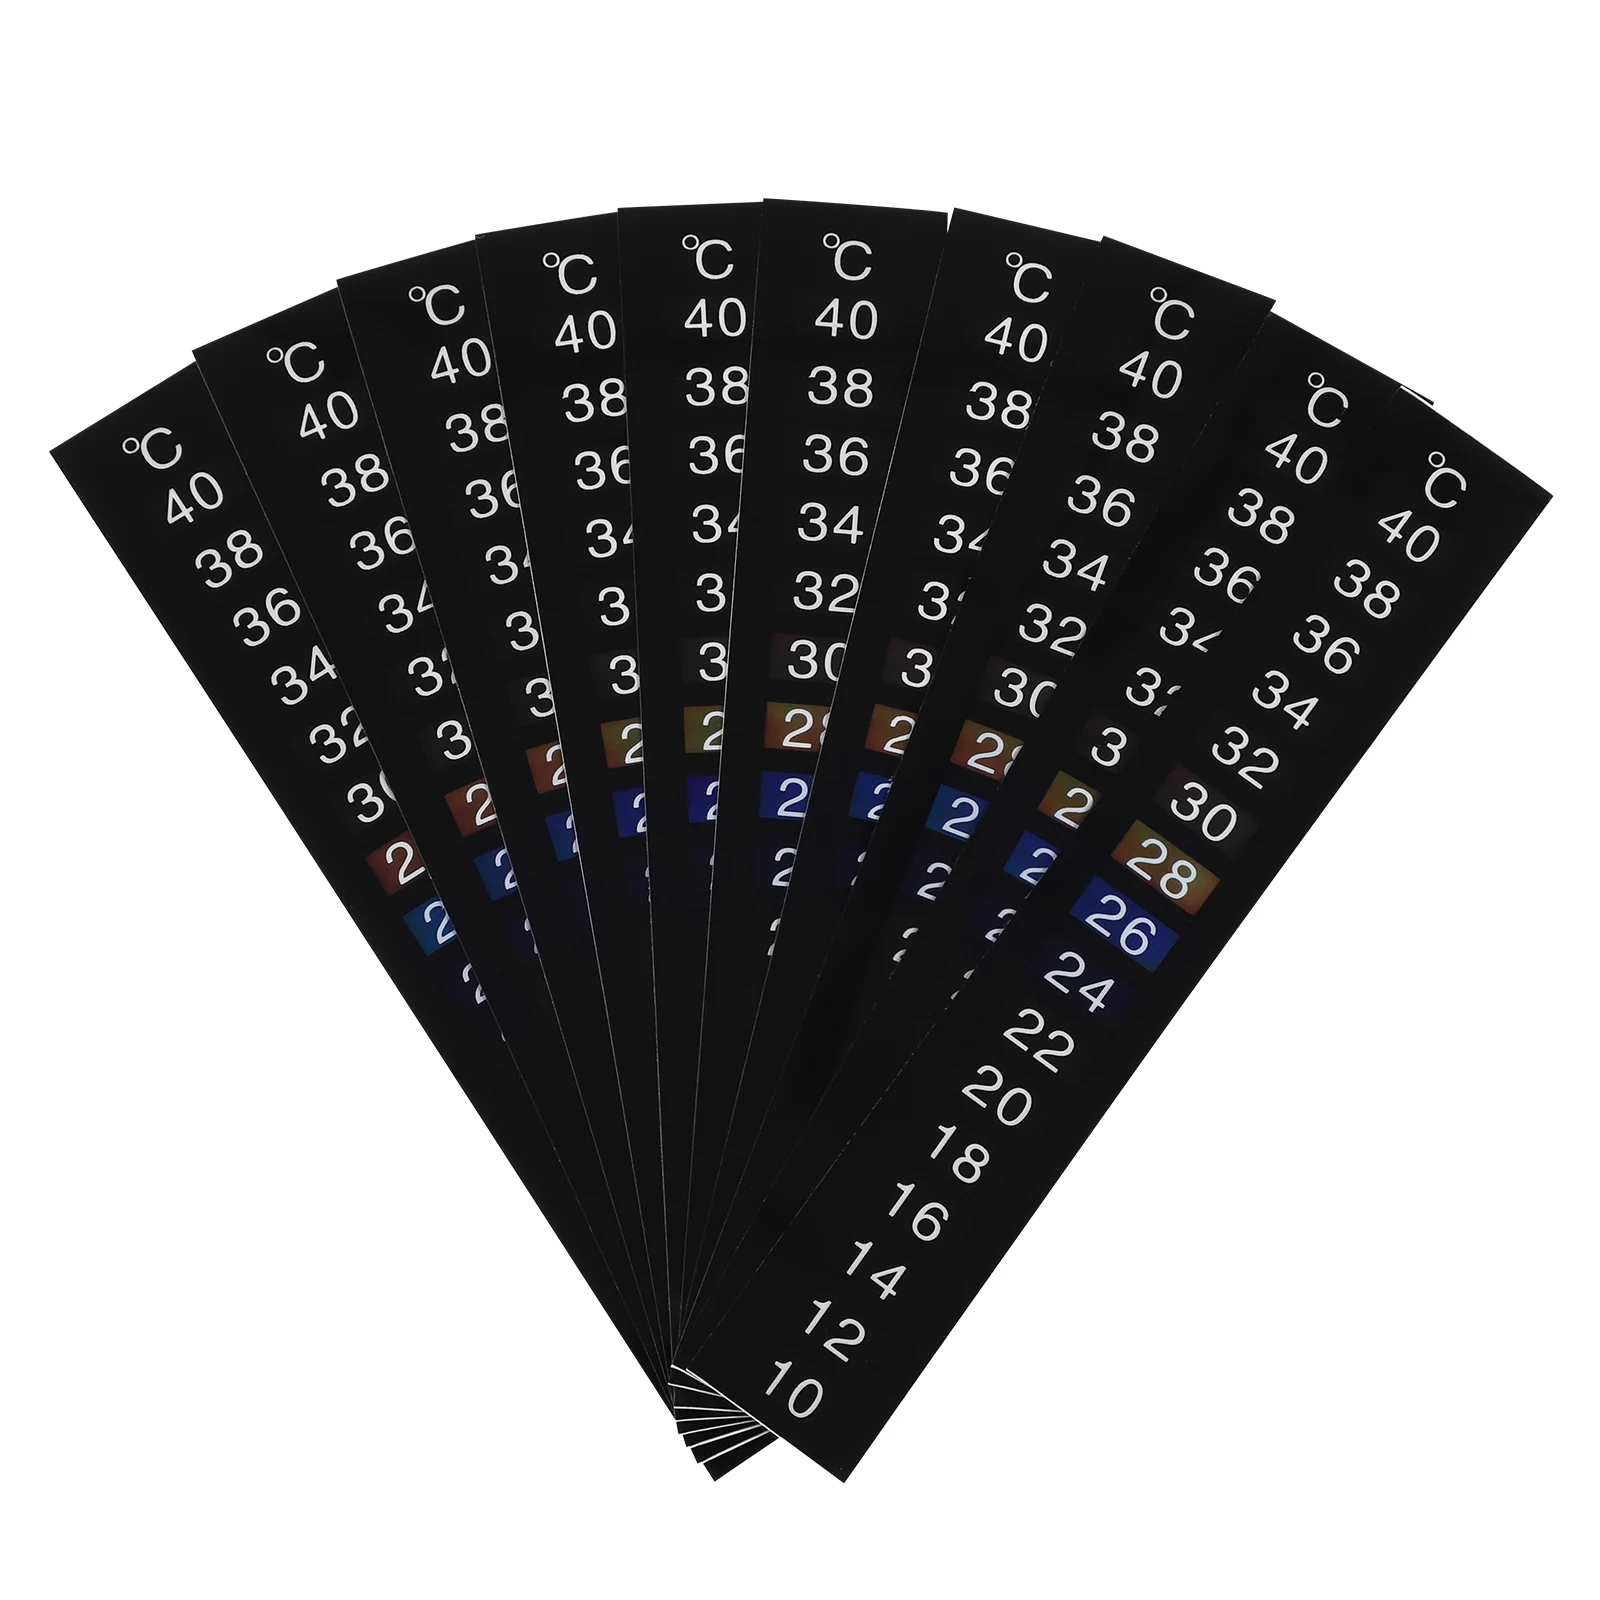 

POPETPOP 10pcs Traditional Stick-on Digital Temperature Thermometer Strip Degree Celsius System Display